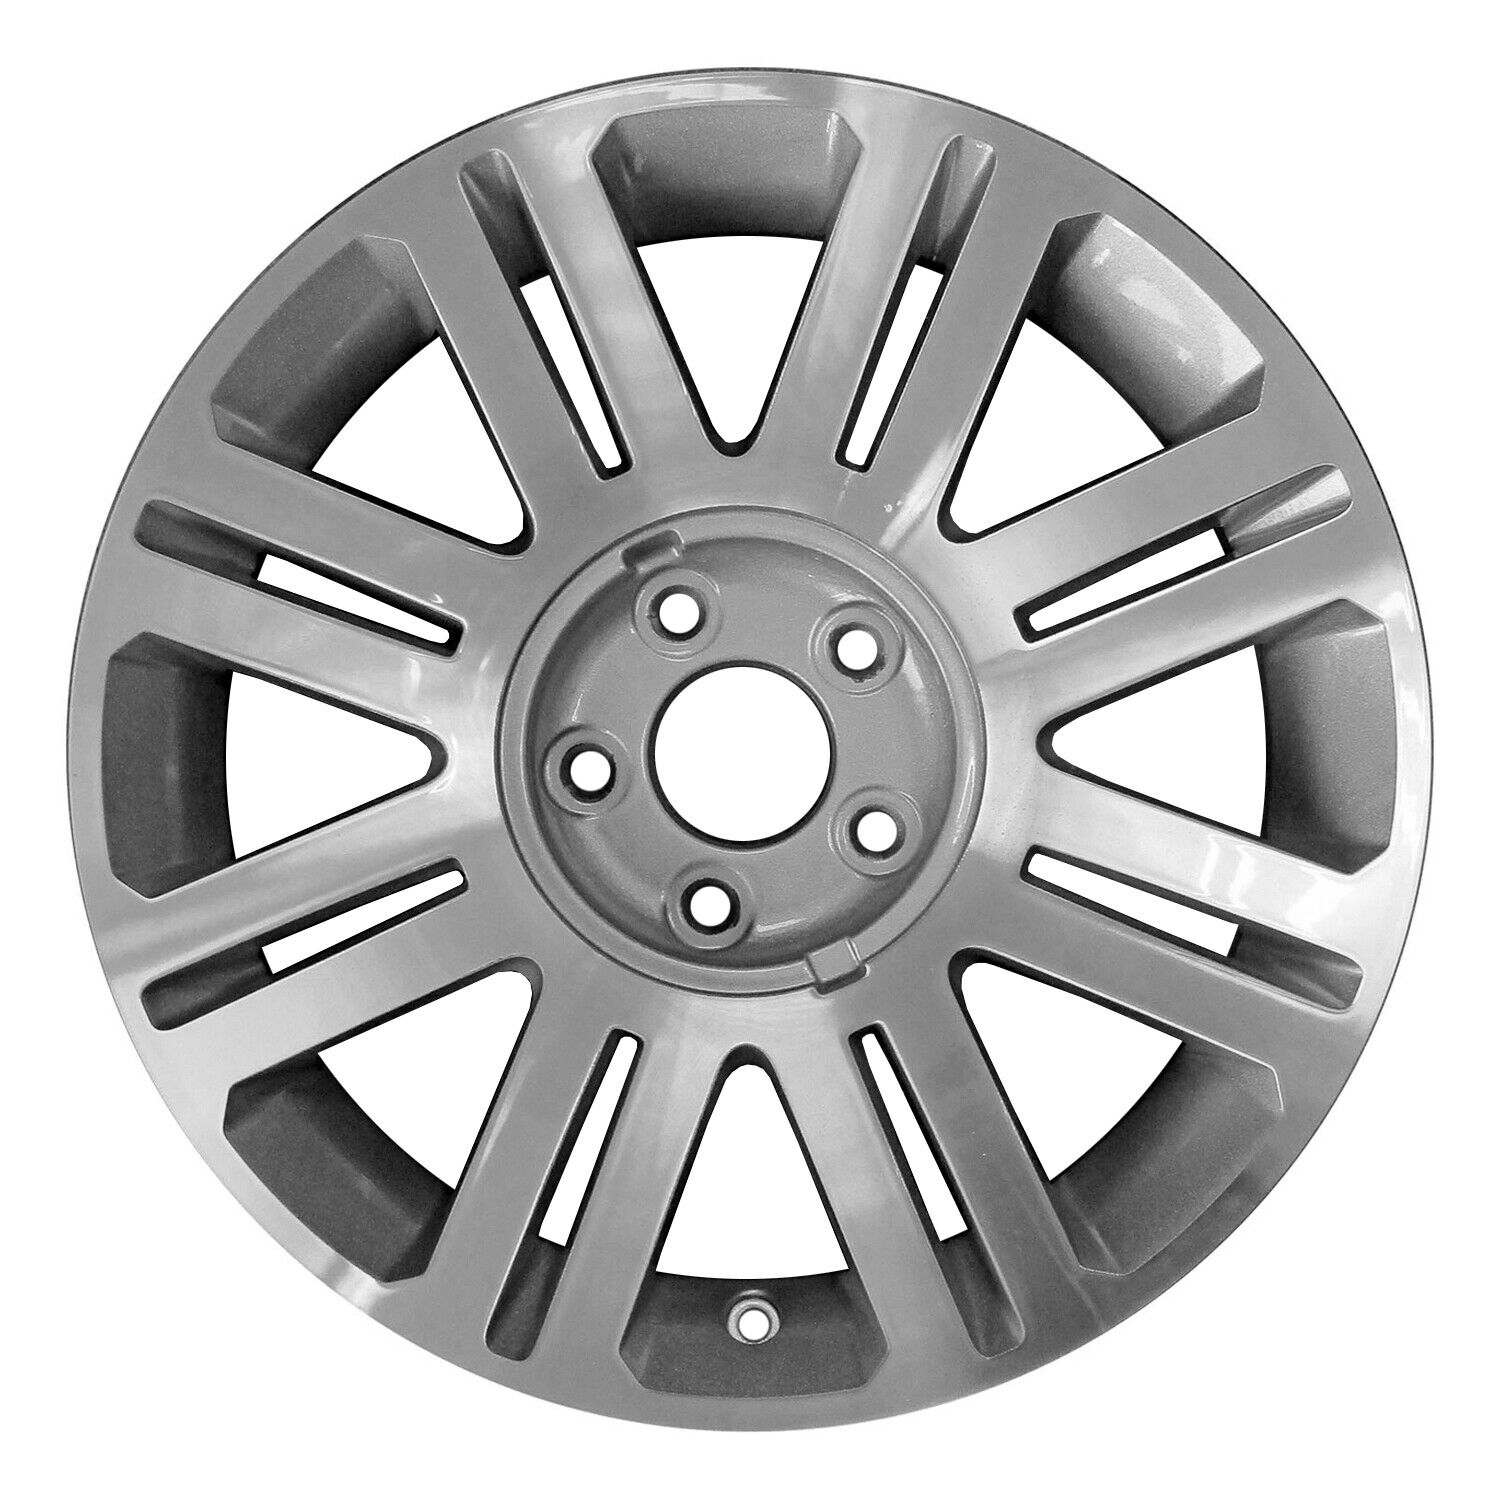 03640 Reconditioned OEM Aluminum Wheel 17x7.5 fits 2006 Lincoln Zephyr